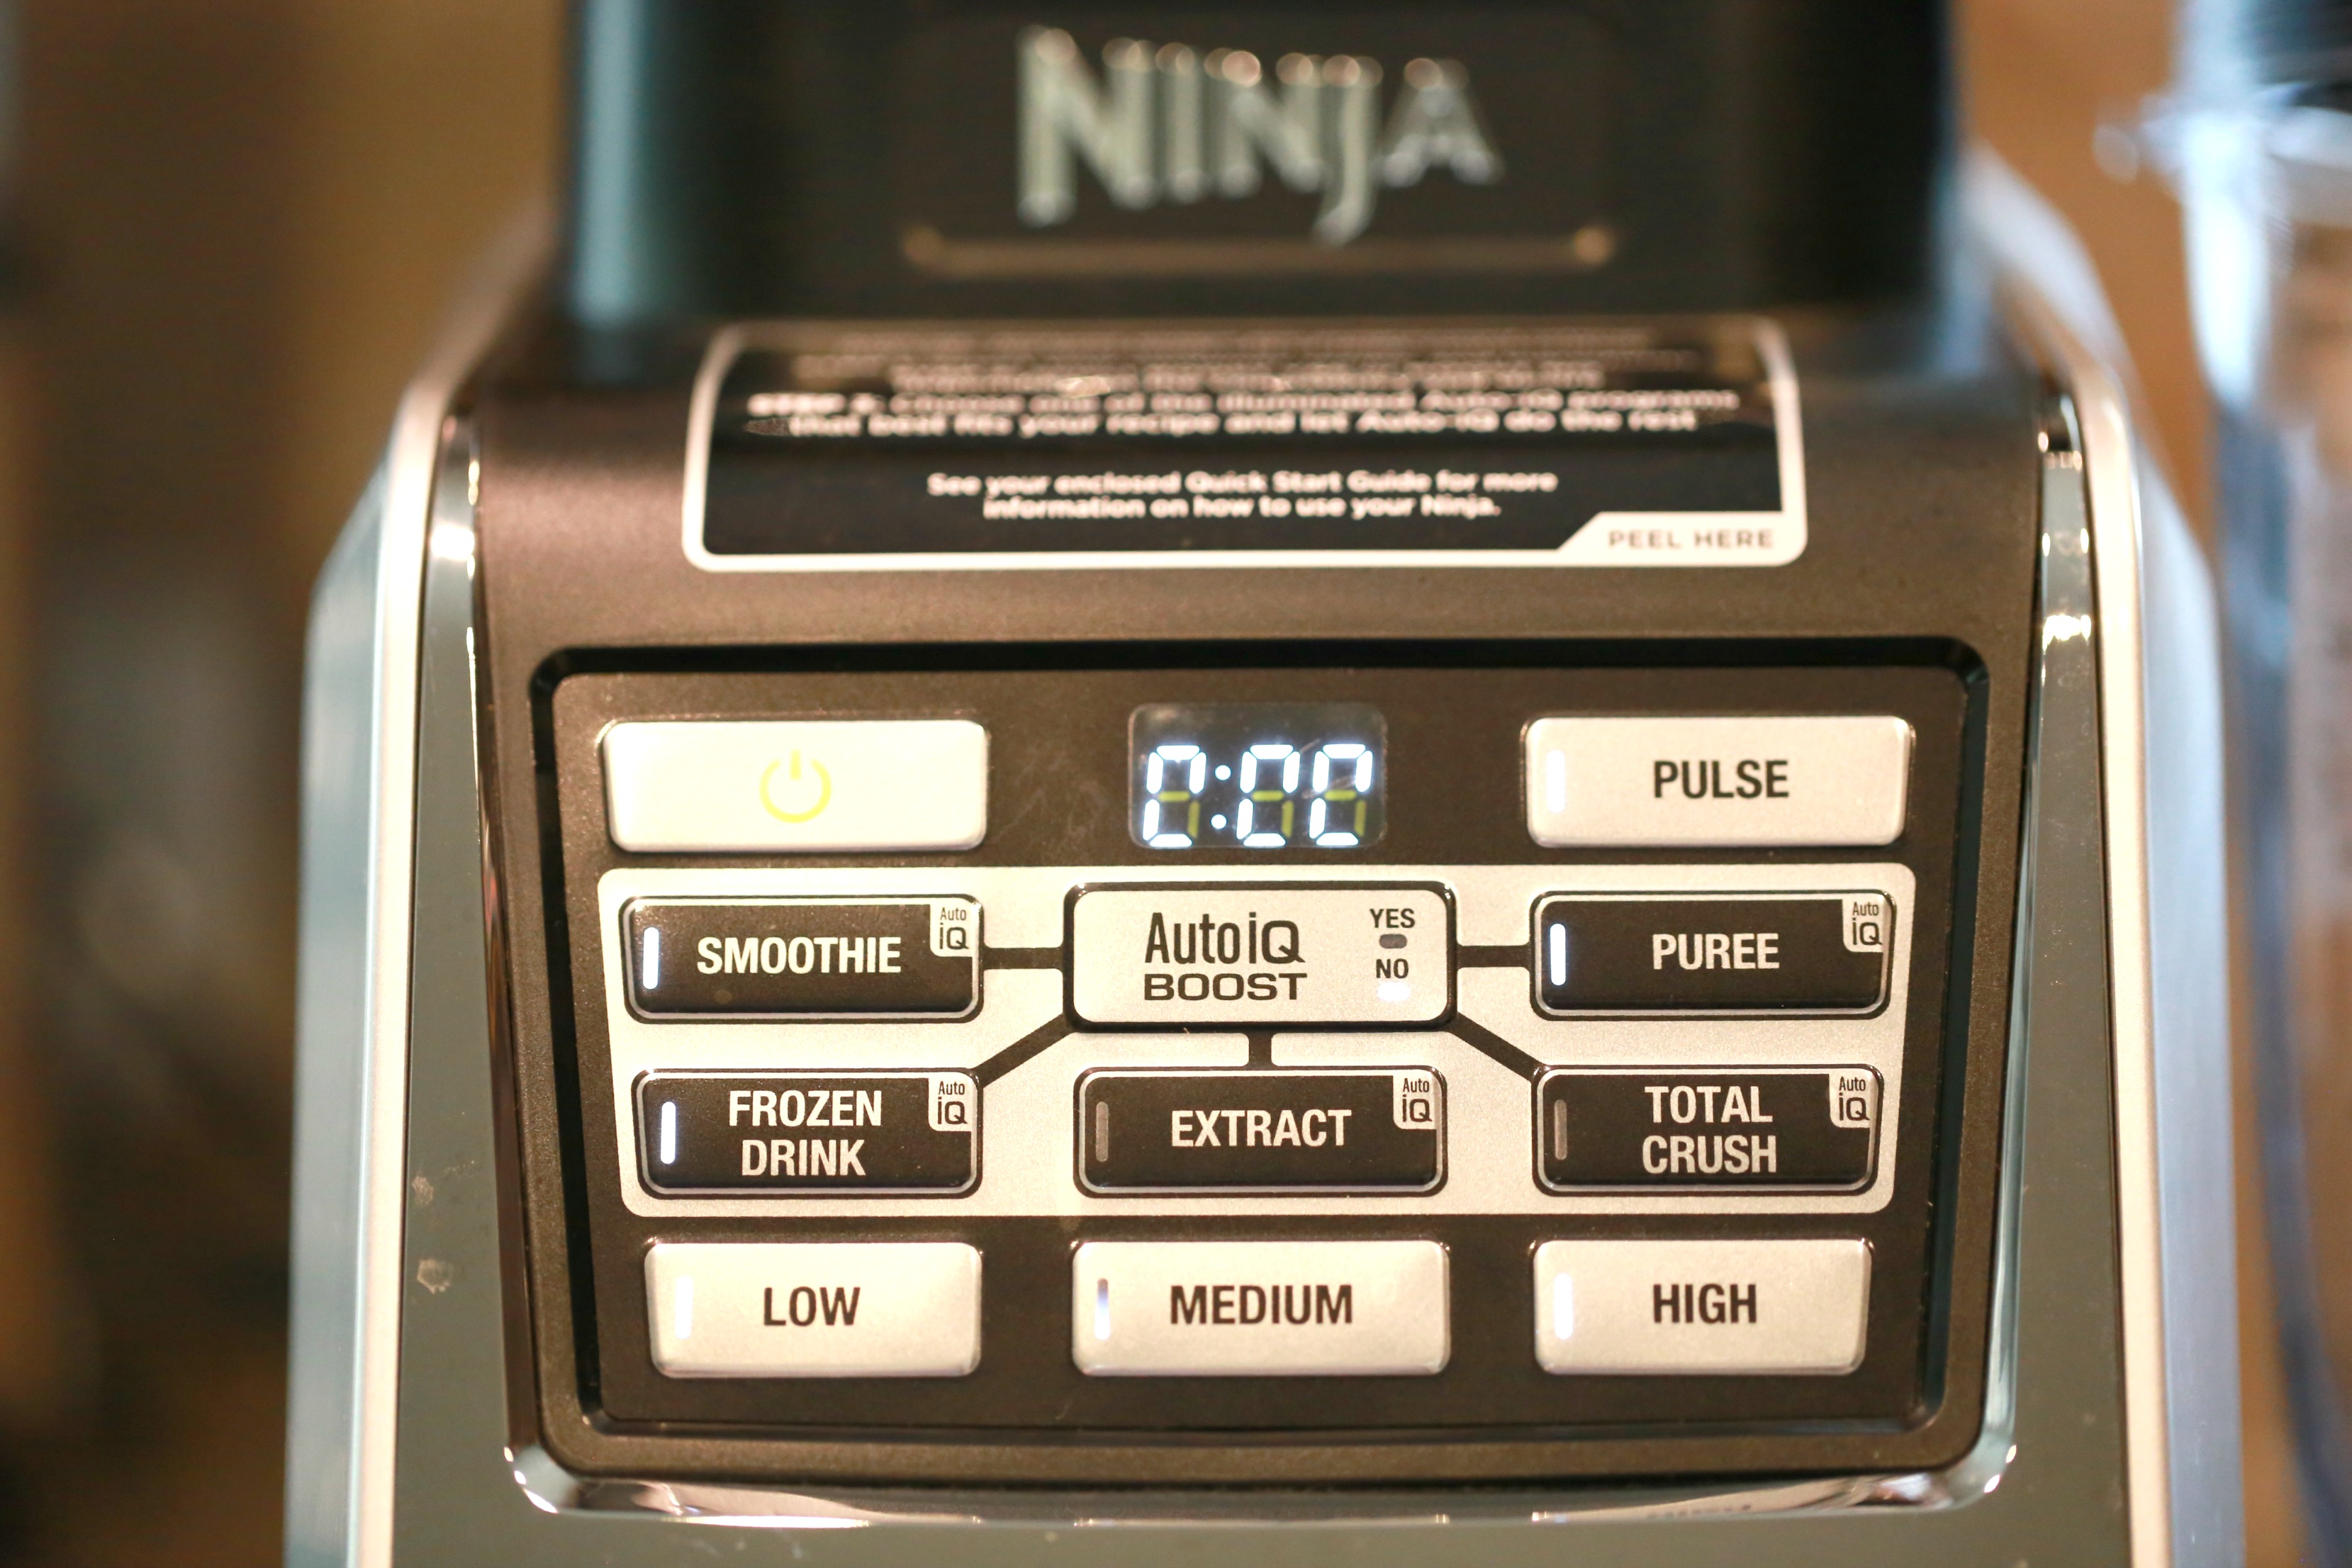 I was so excited to get a Ninja blender. See what I think about it in my Ninja BlendMax Duo review.